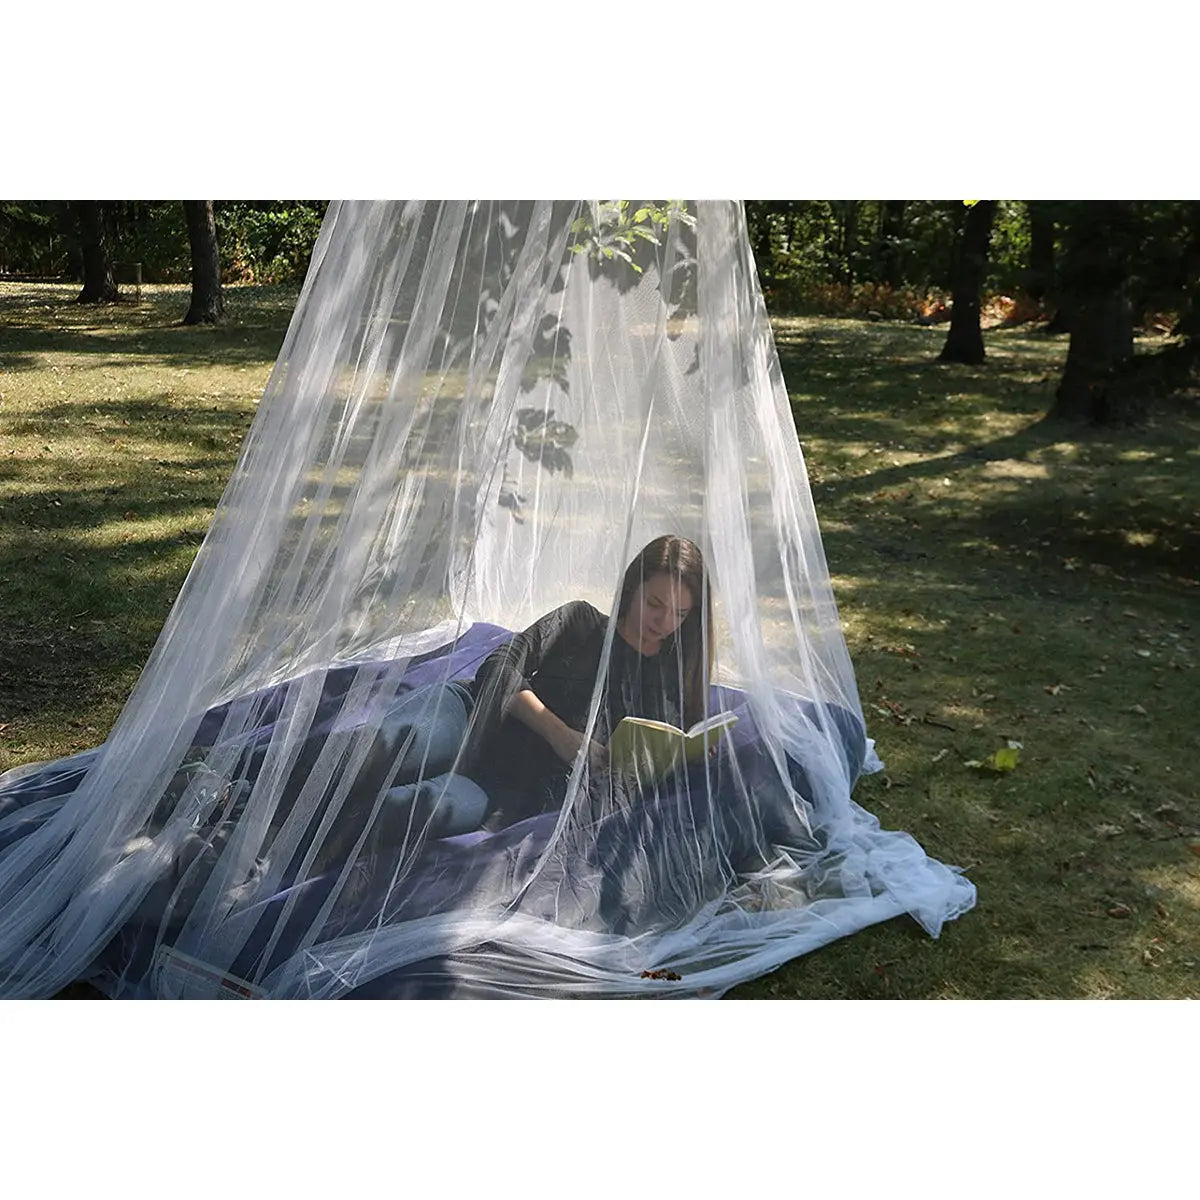 Coghlan's Travellers Mosquito Net, 1-2 Persons, Travelers Made from Fine Mesh Coghlan's